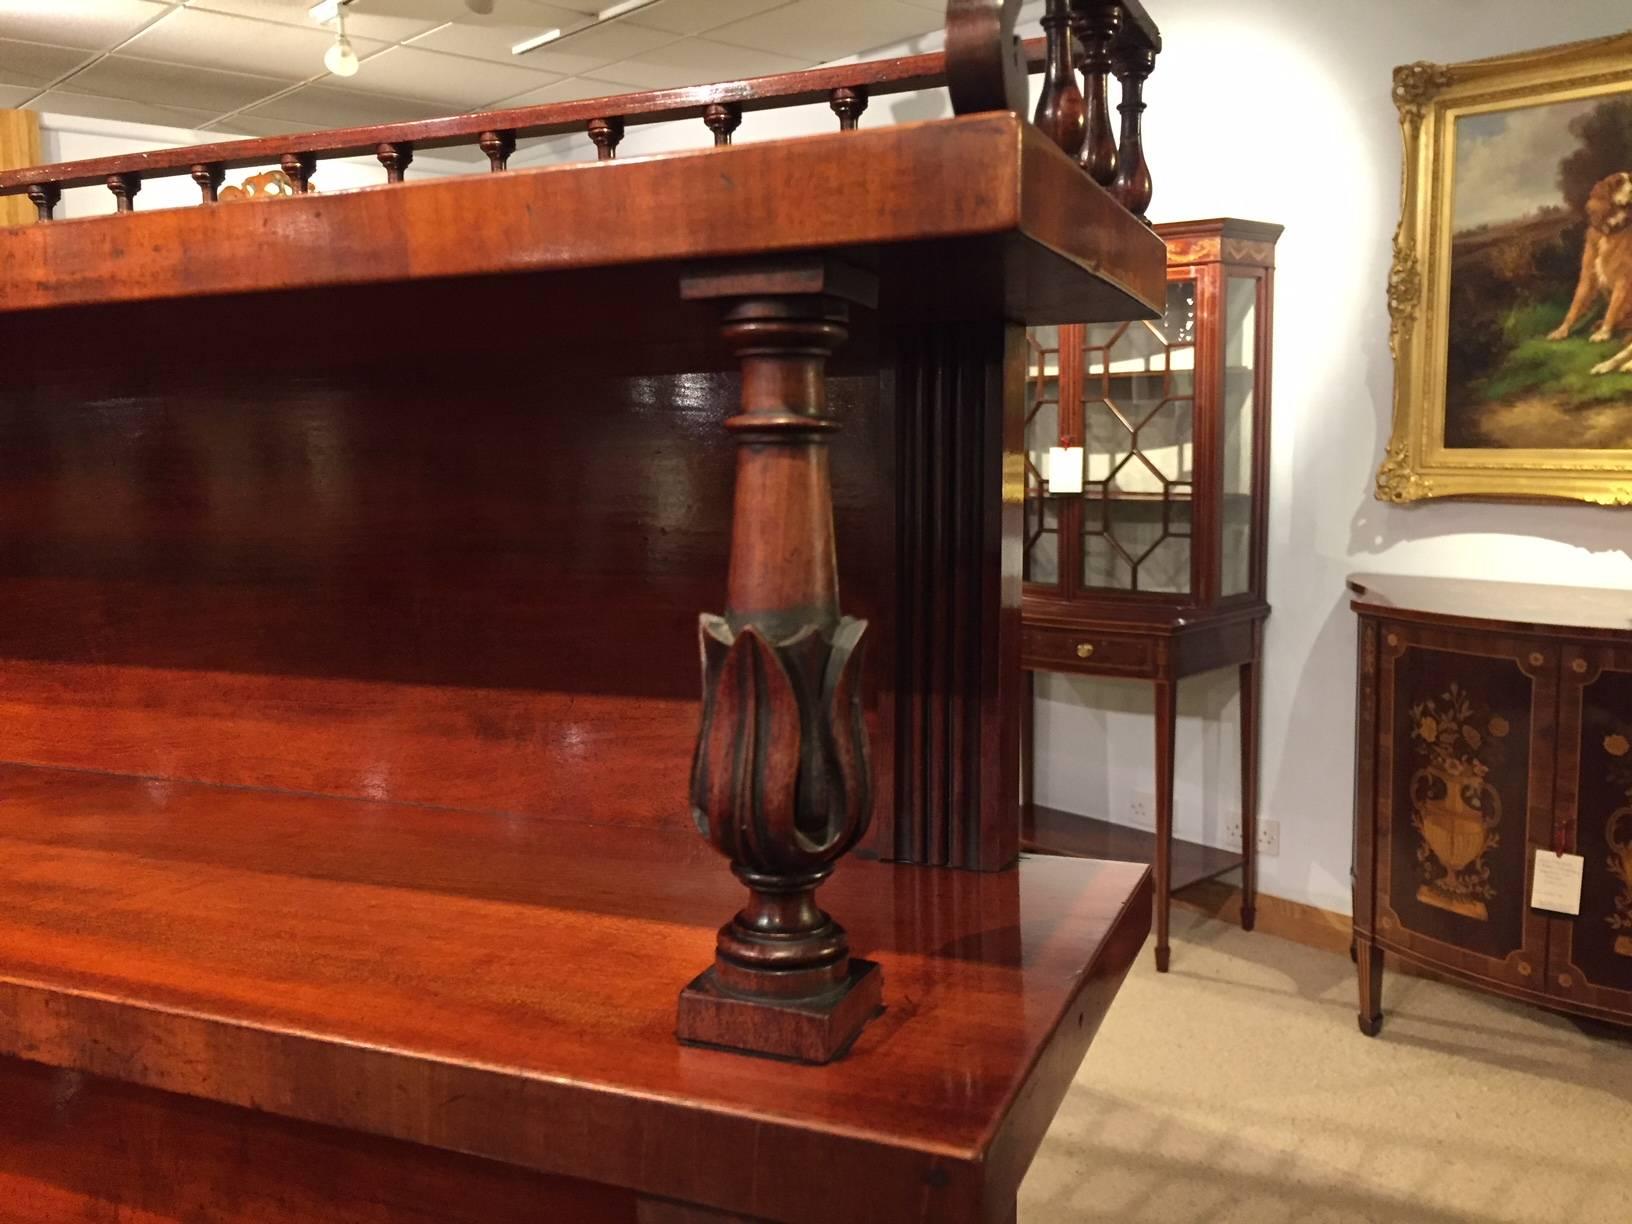 A superb mahogany Regency period chiffonier by Gillows of Lancaster. Having an upper section with two mahogany shelves with a finely turned balustrade gallery supported on finely carved columns. The lower section of breakfront outline in the finest